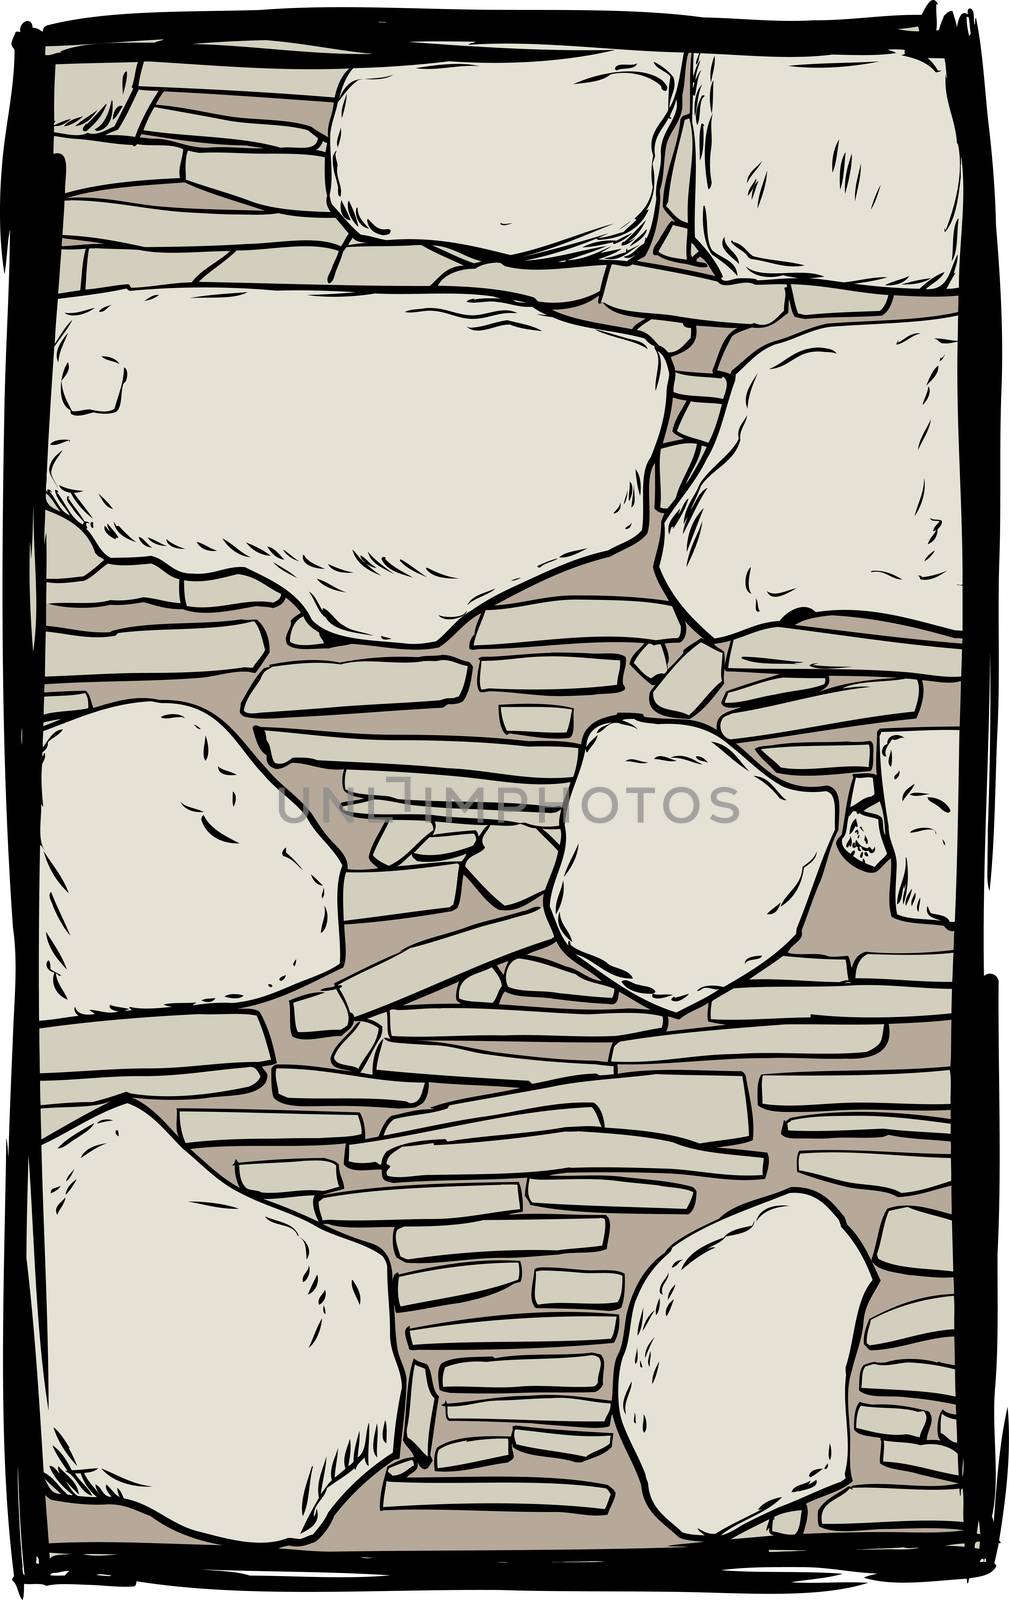 Old stone wall illustration by TheBlackRhino